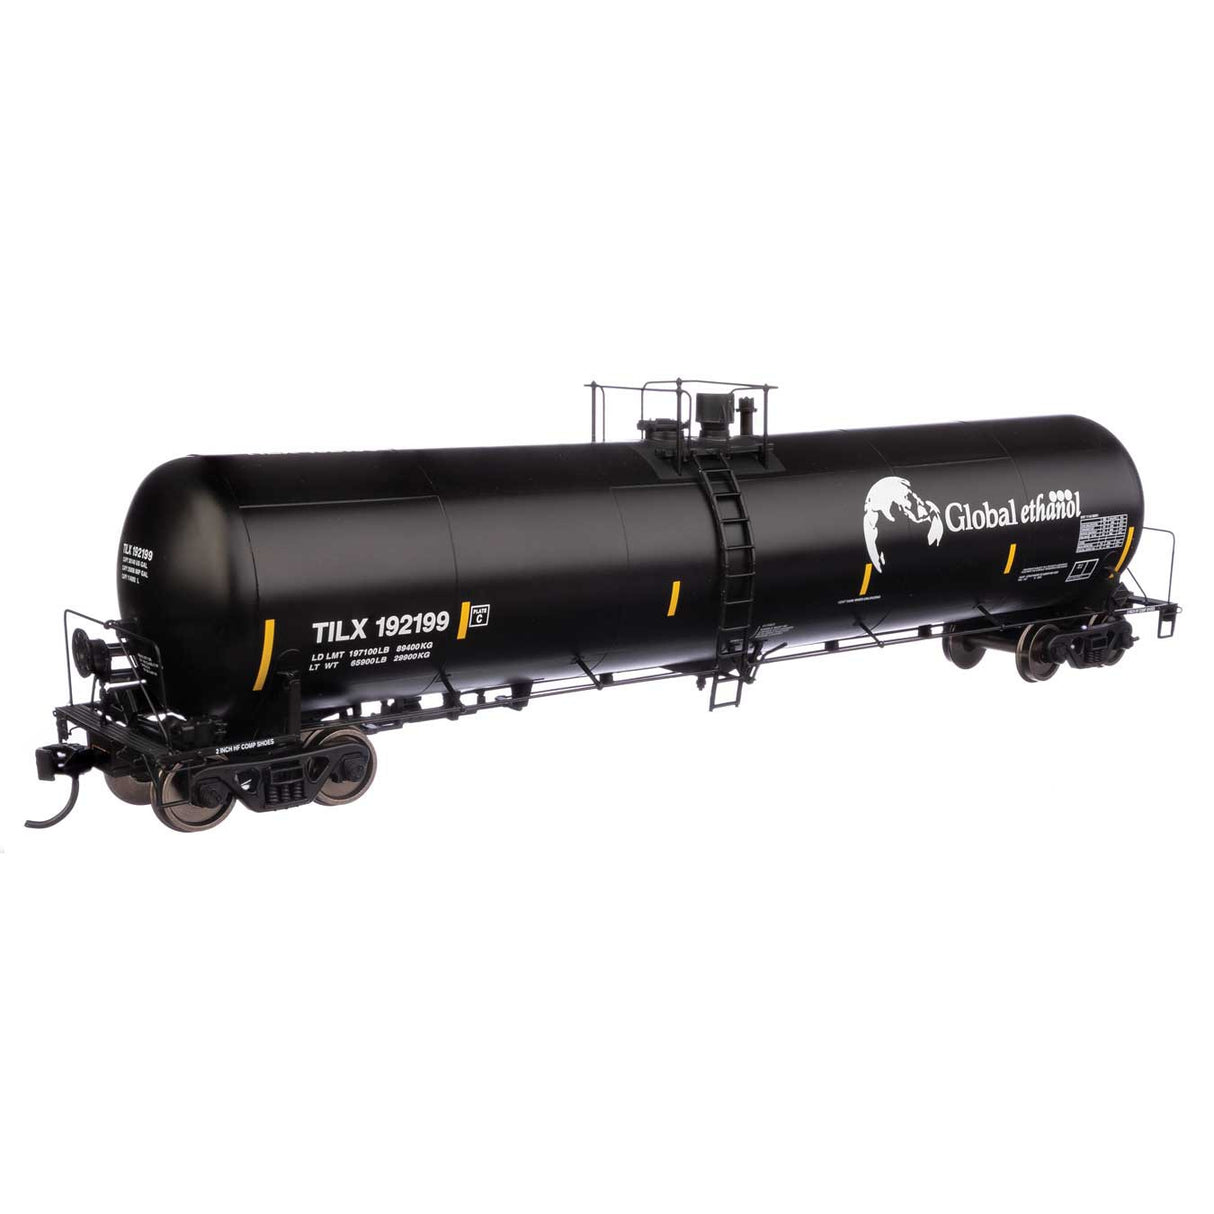 Walthers Proto 55' Trinity 30,145-Gallon Tank Car Global Ethanol TILX #192199 (black, white, yellow conspicuity marks)